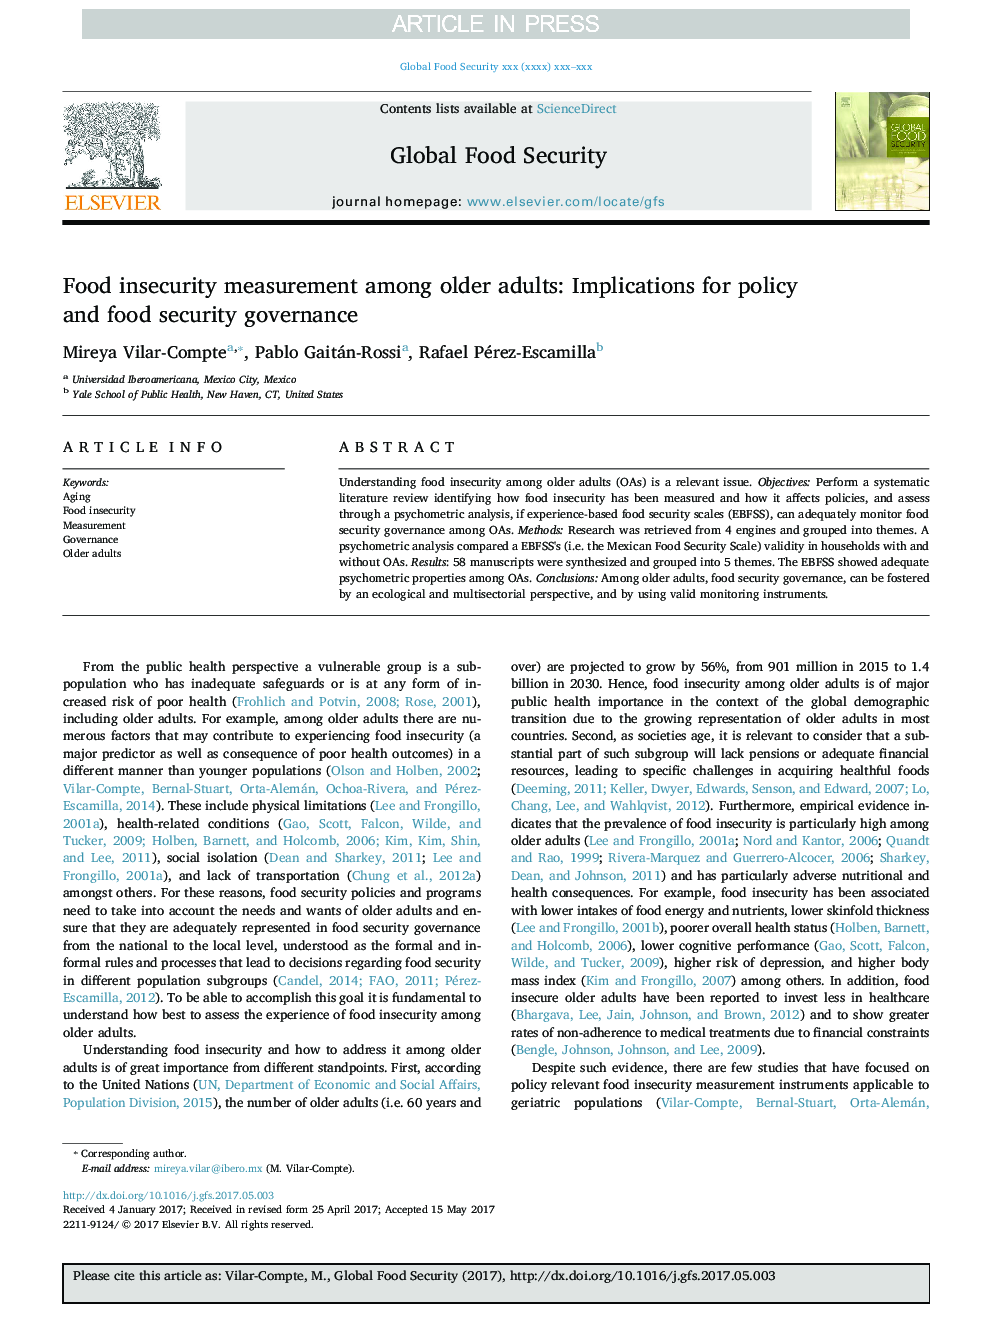 Food insecurity measurement among older adults: Implications for policy and food security governance